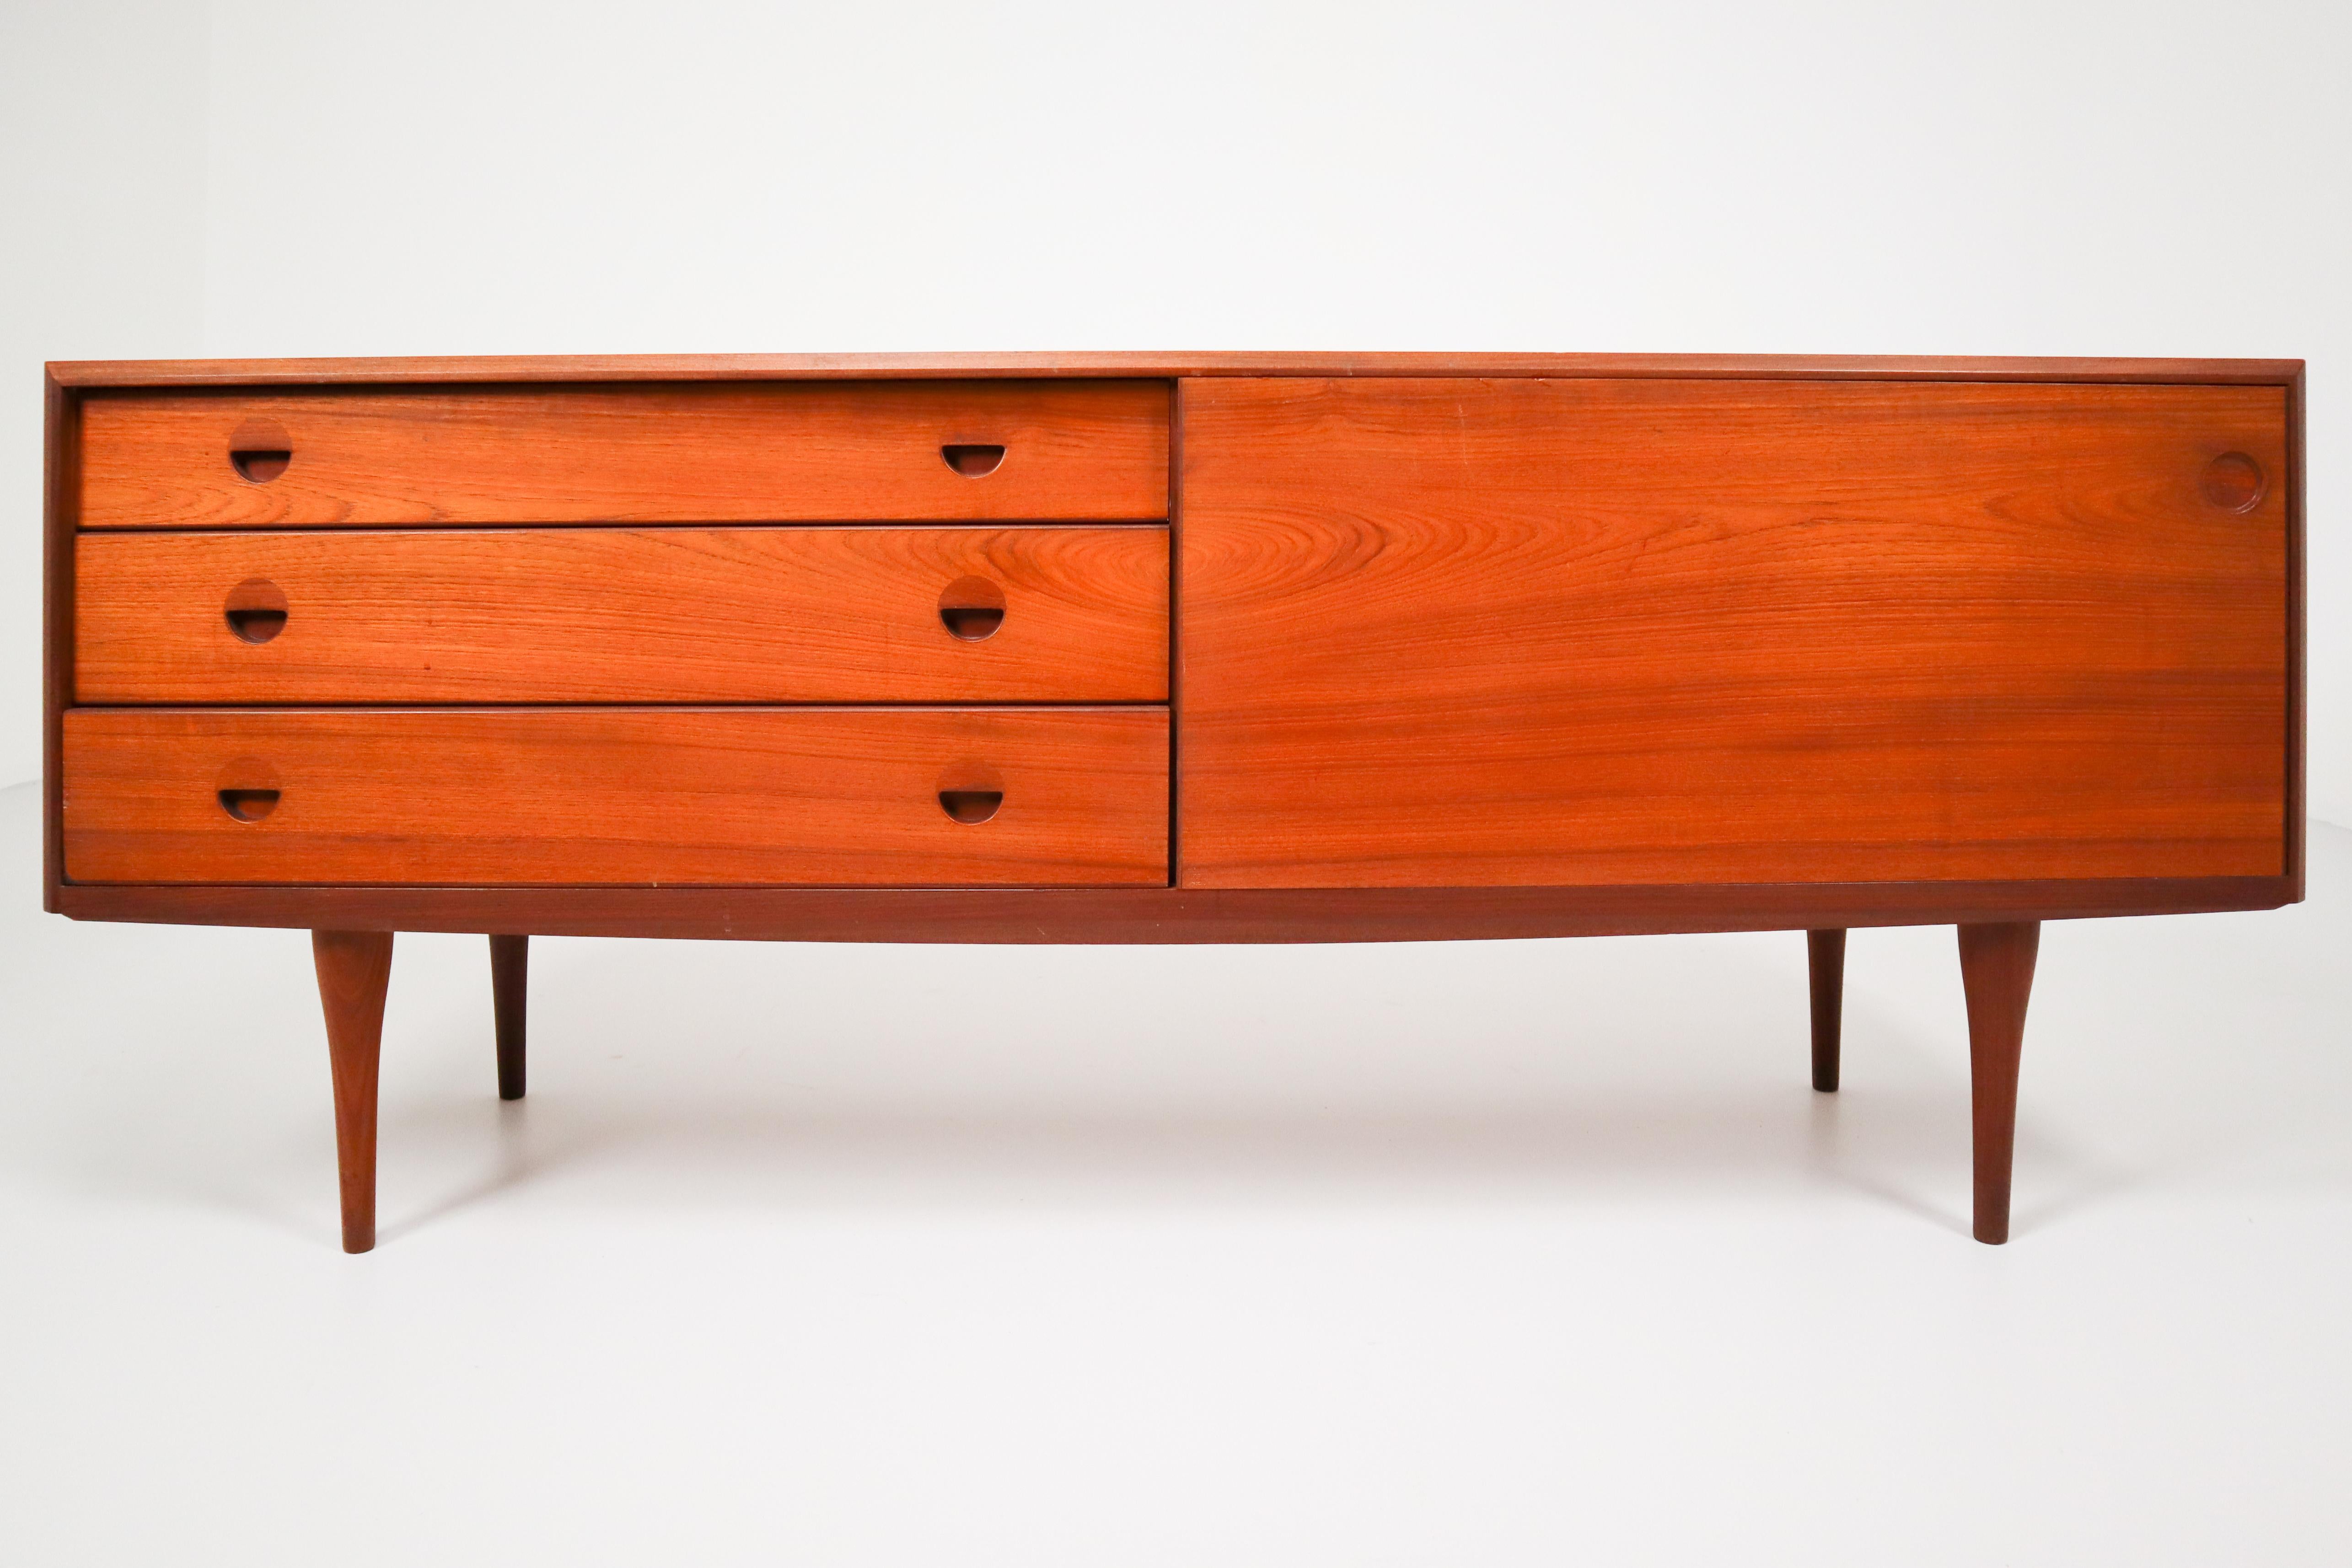 Enfilade teak by Takashi Okamura for O. Bank Larsen, Møbelfabrik, Denmark, 1950s. Three drawers and a sliding door opening. The top drawer has a sliding and removable tray. Preserved in good condition and original patina.